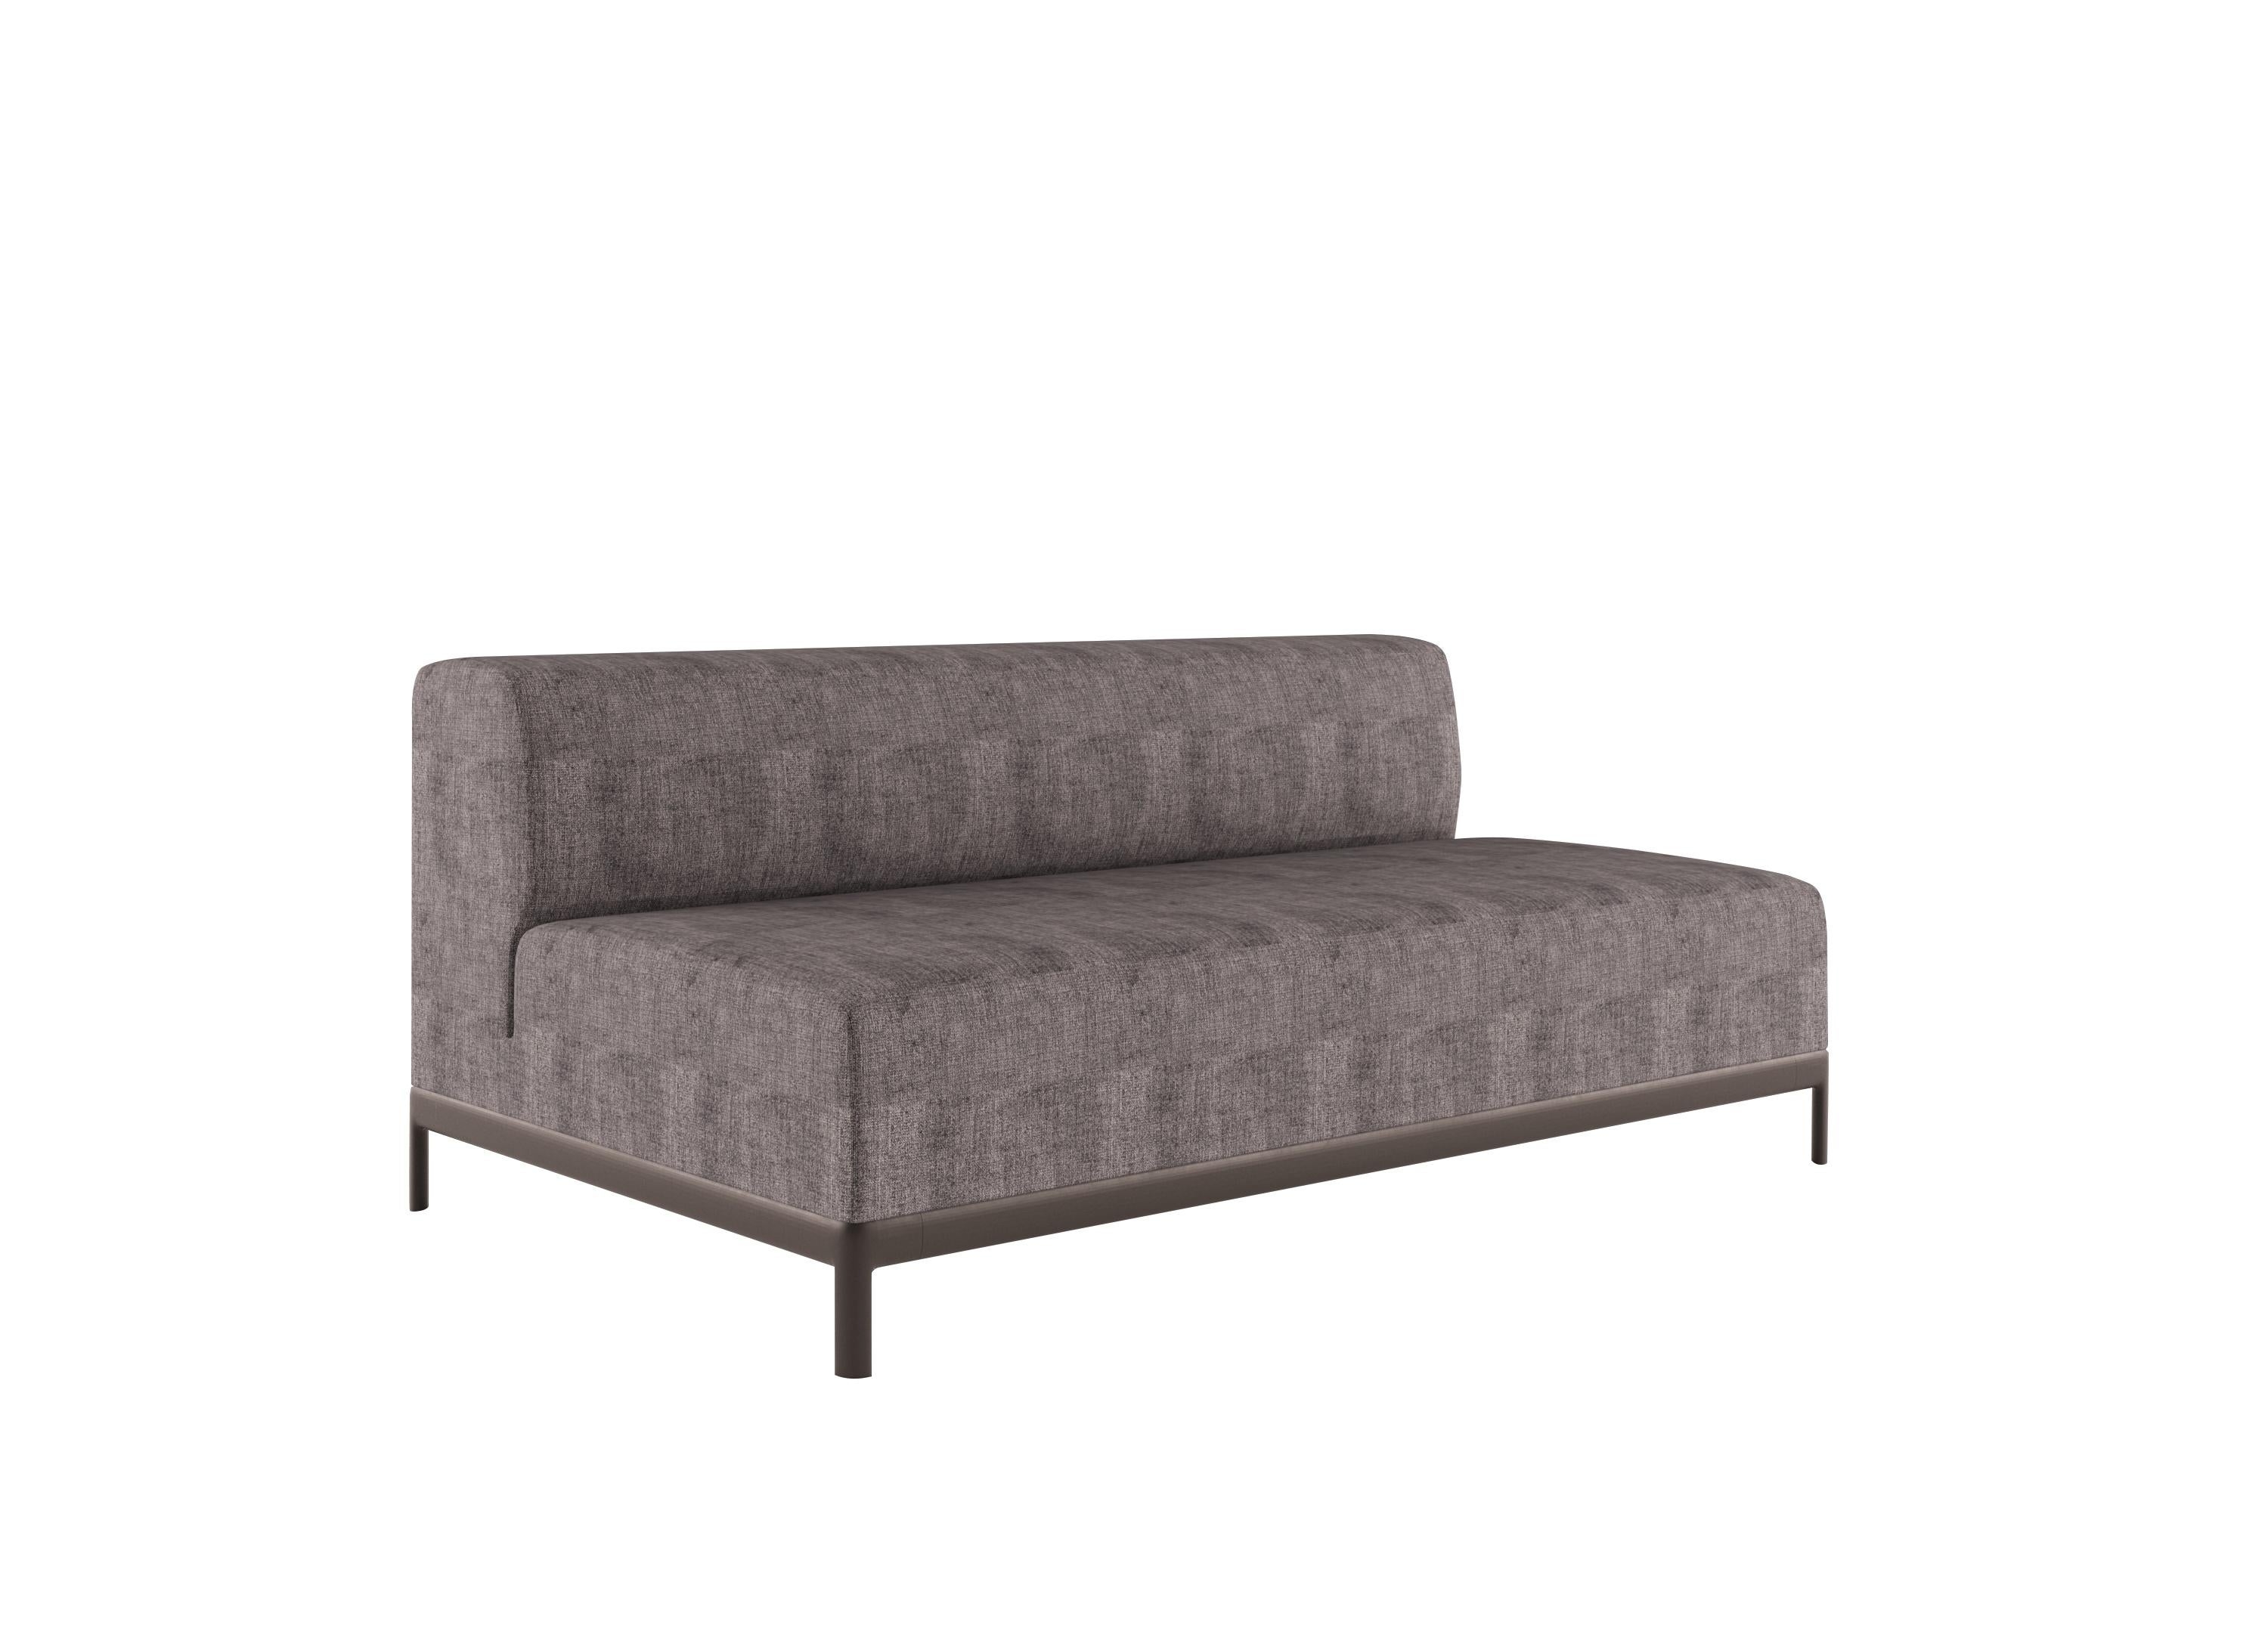 Alias P34 AluZen Soft Central Sofa with Upholstery and Lacquered Aluminum Frame by Ludovica+Roberto Palomba

Central modular element with structure in lacquered or polished aluminium.Seat and back with removable cover in fabric or